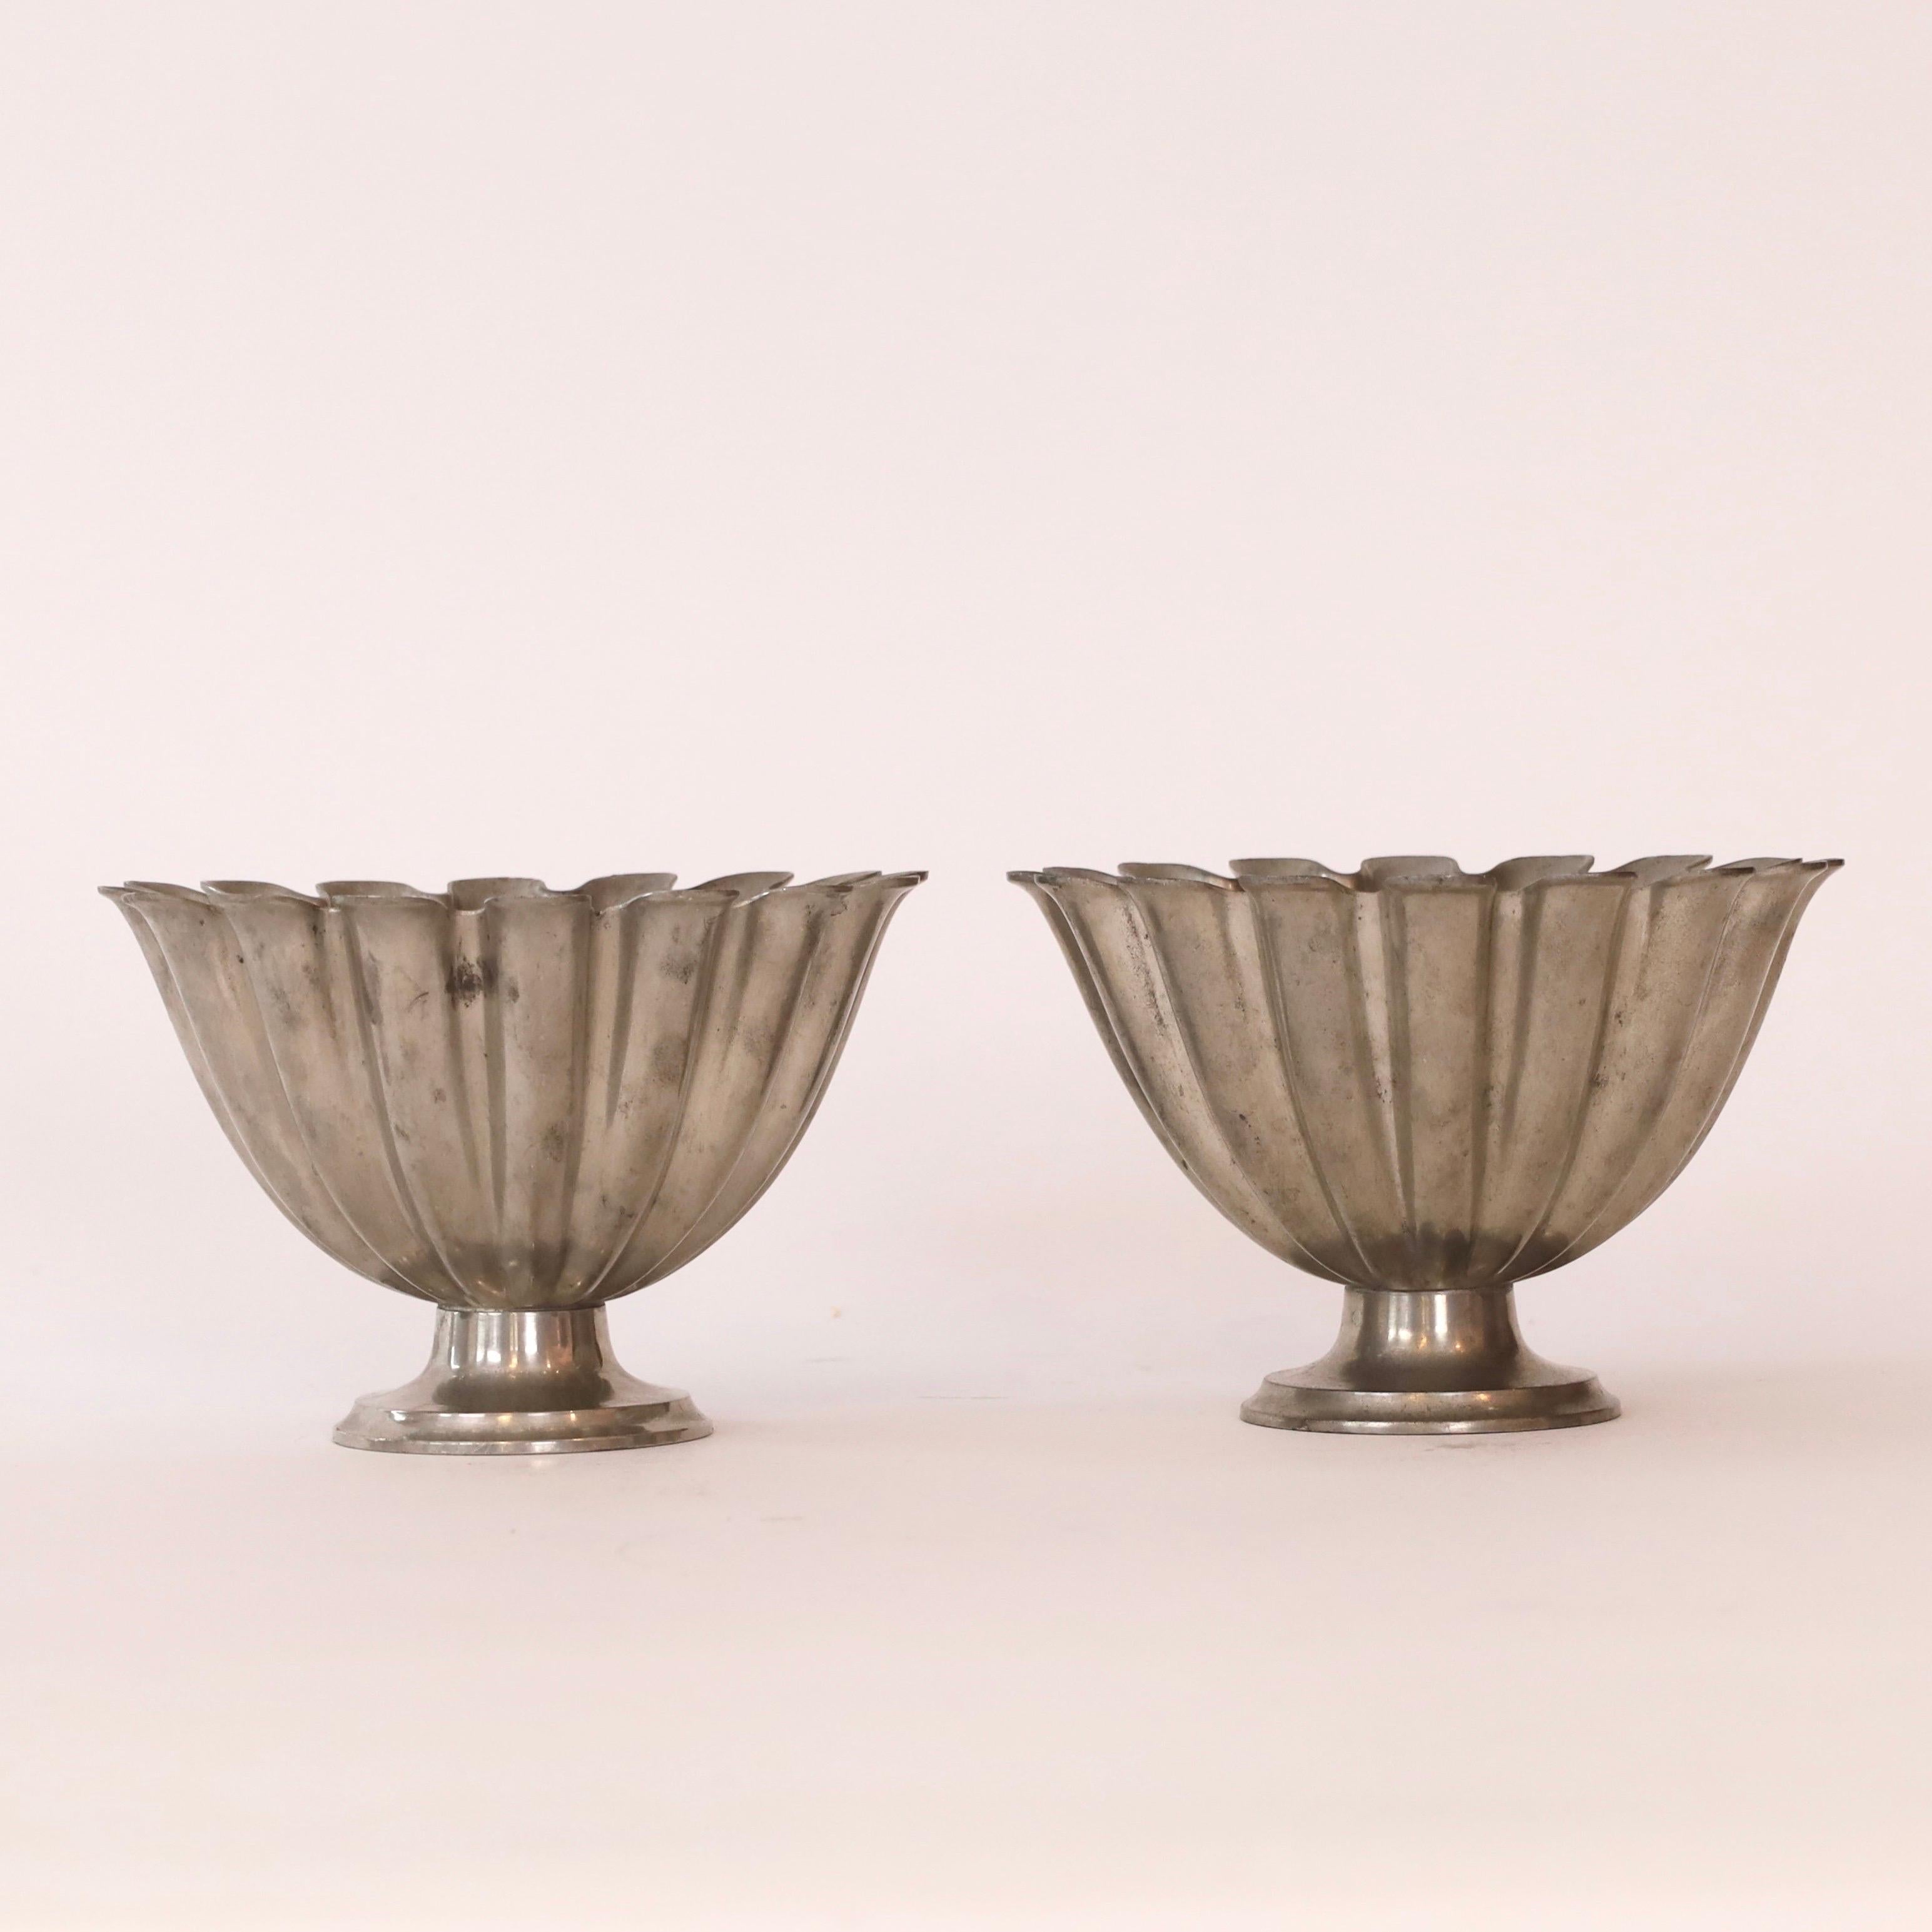 Pair of Scalloped pedestal pewter bowls by Just Andersen 1920s, Denmark In Good Condition For Sale In Værløse, DK